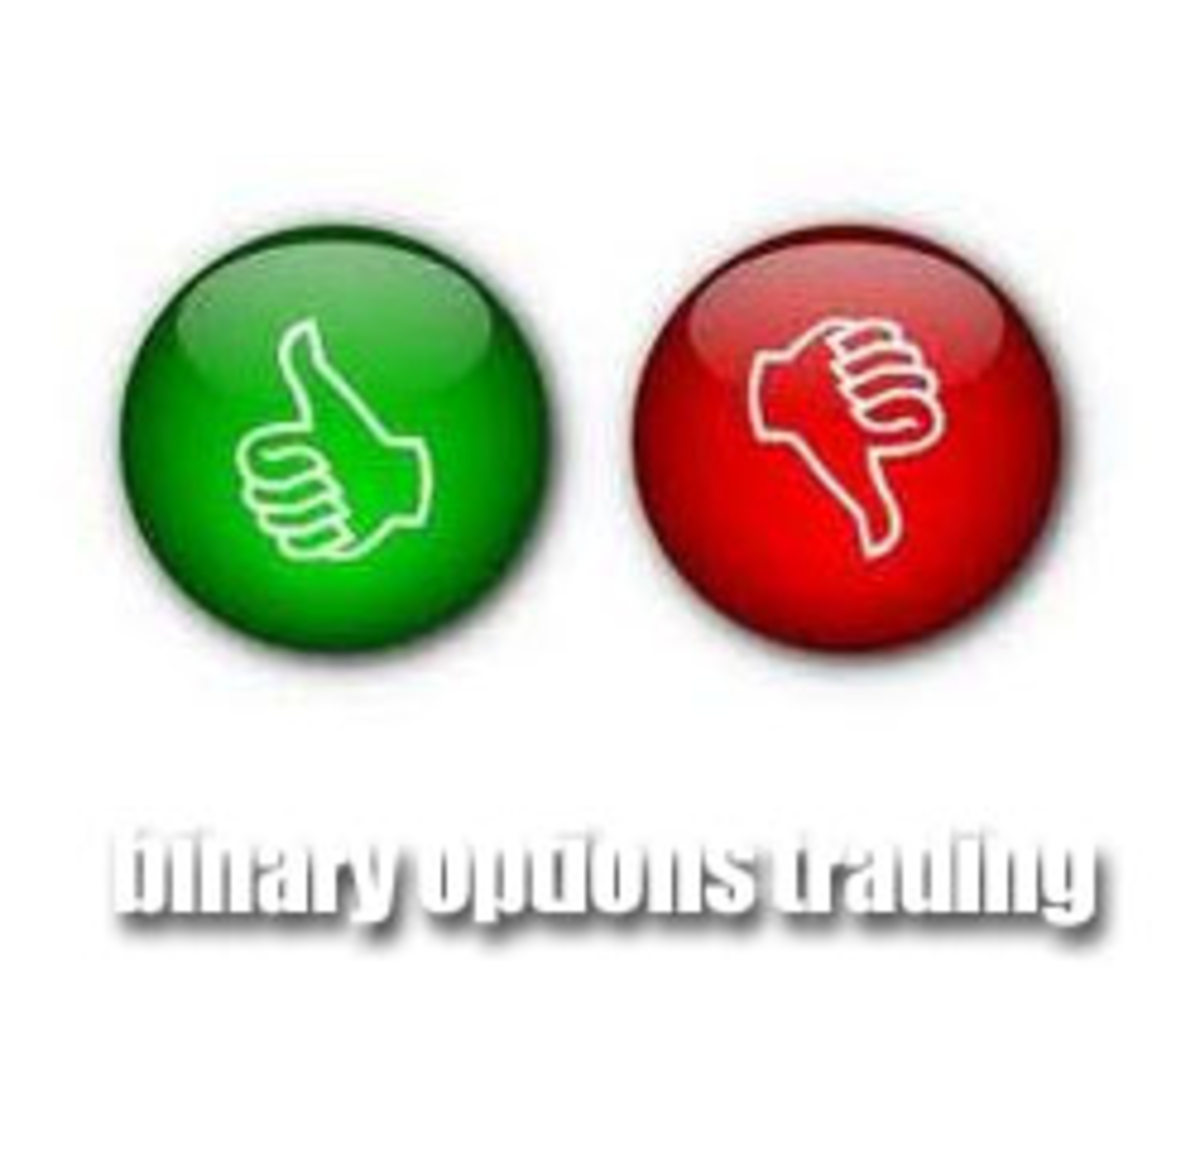 Currency house binary trading